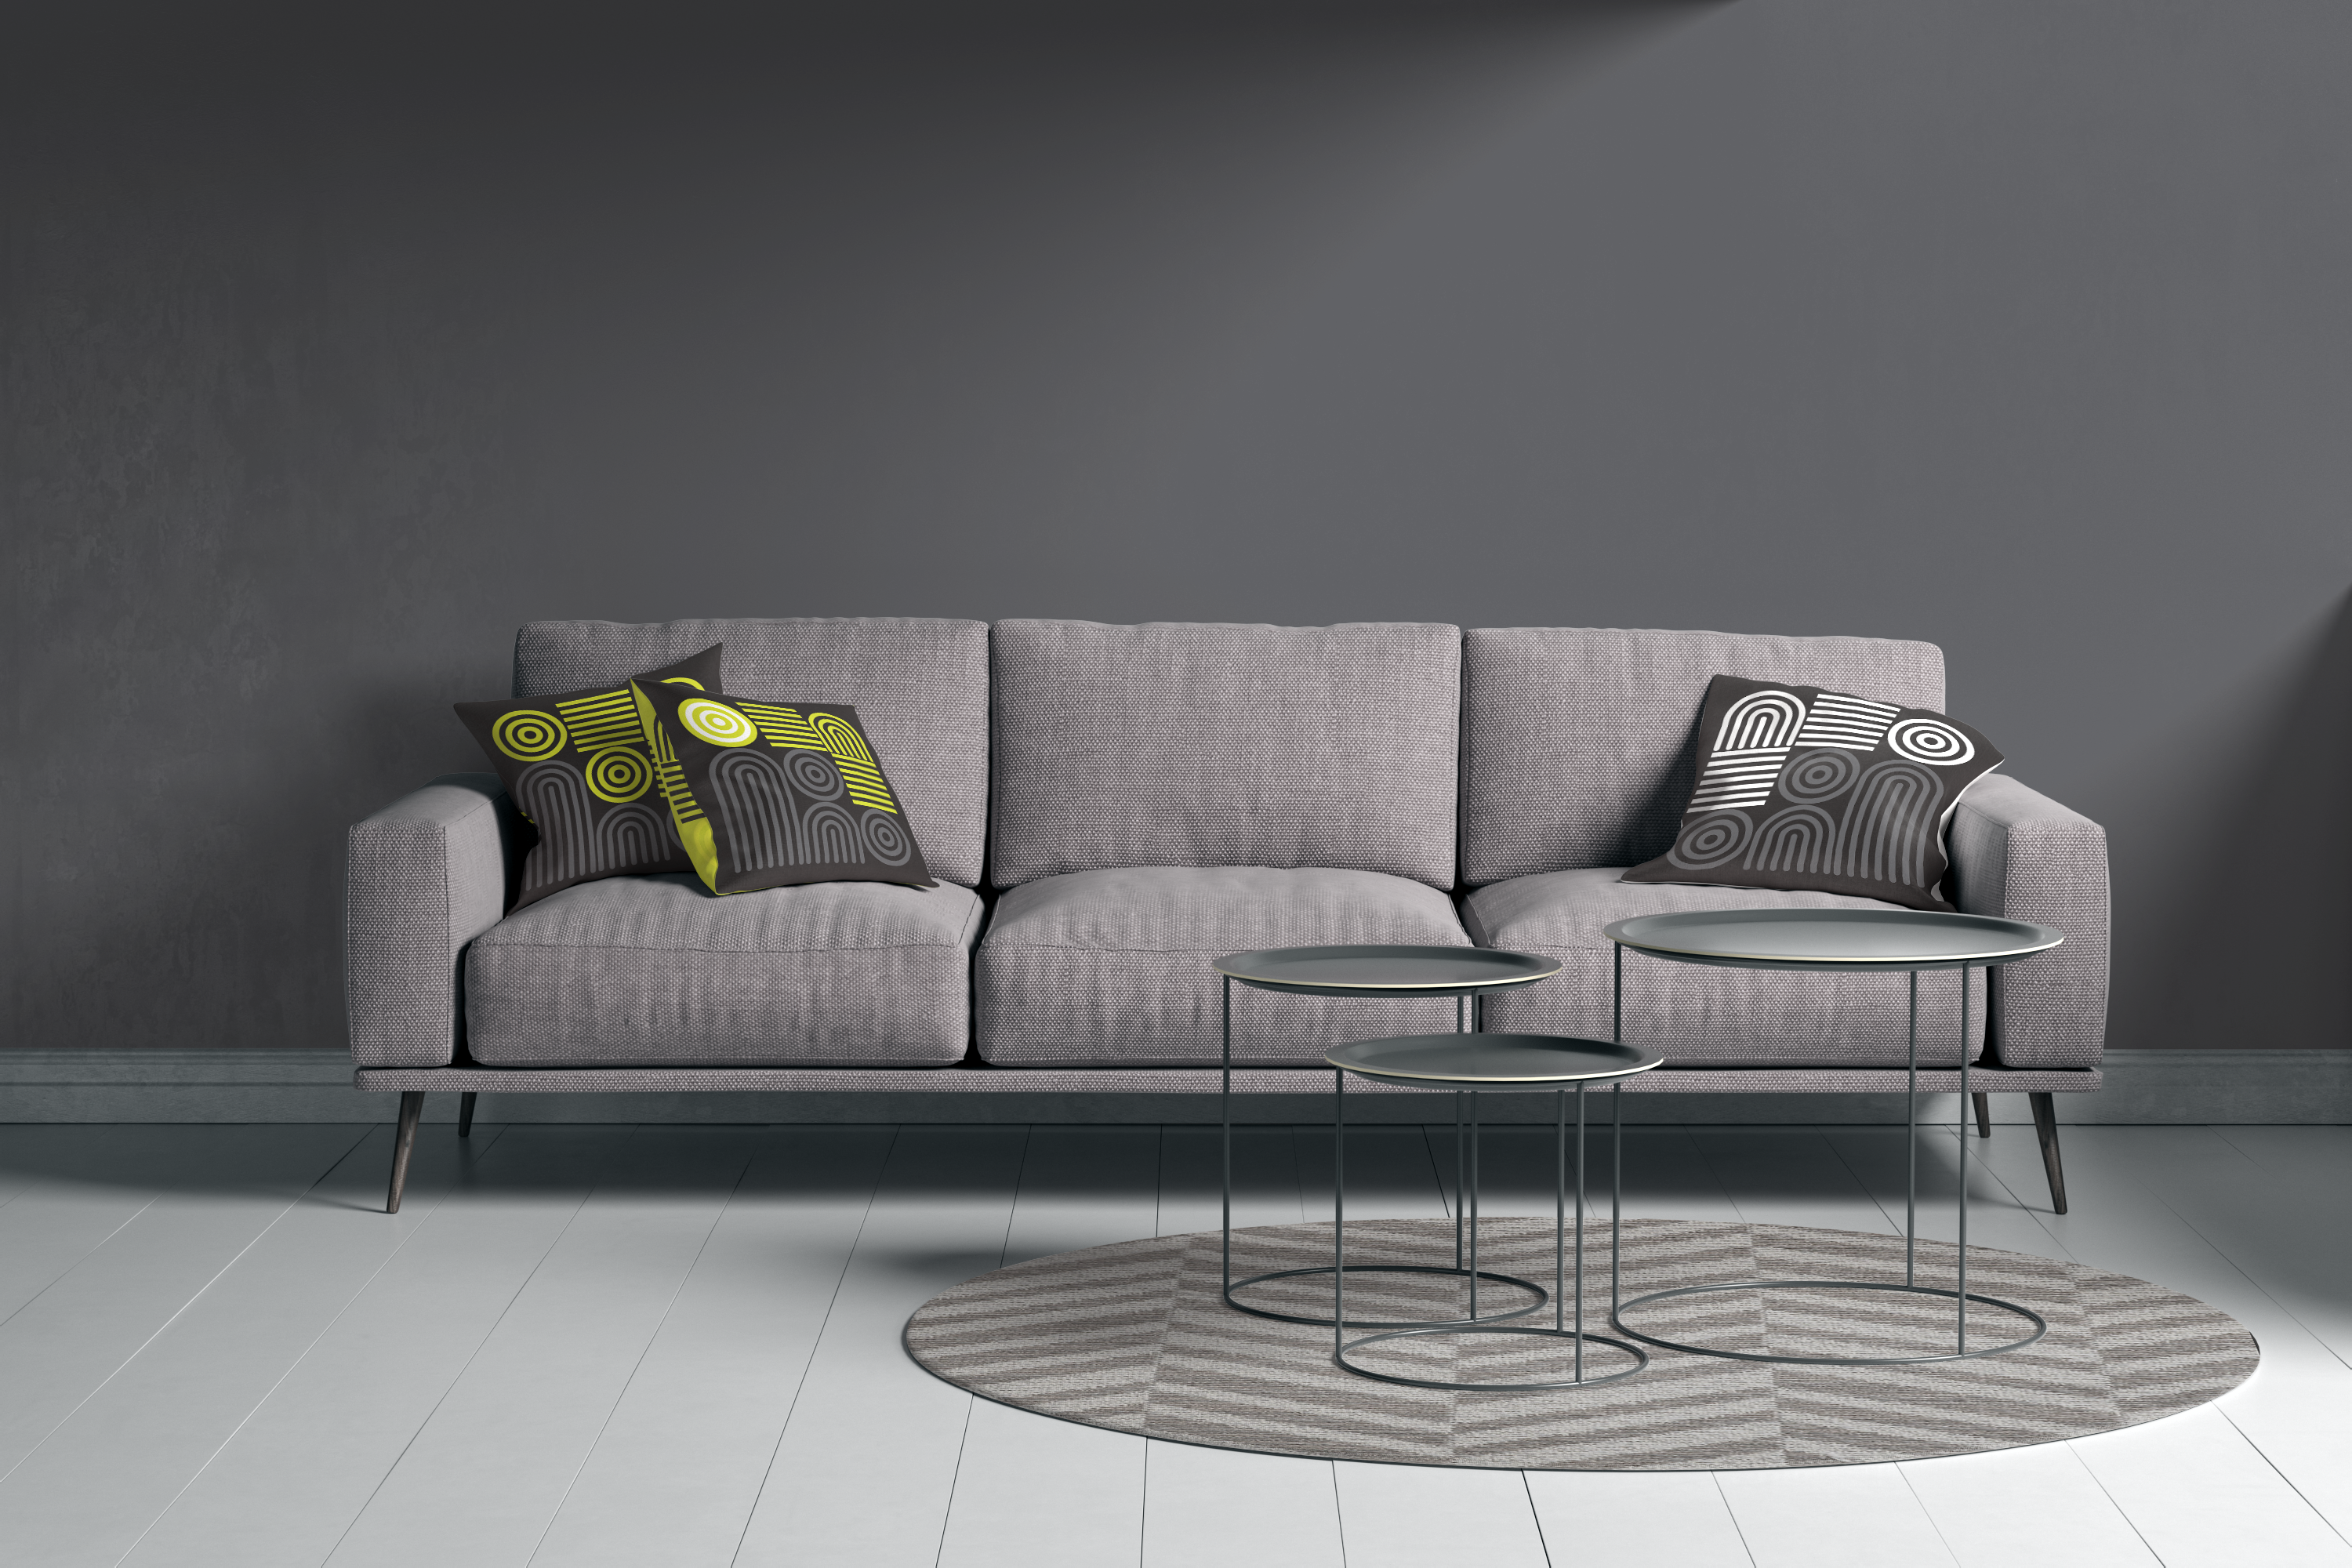 Living Room Mockup_Grey Couch 2-4